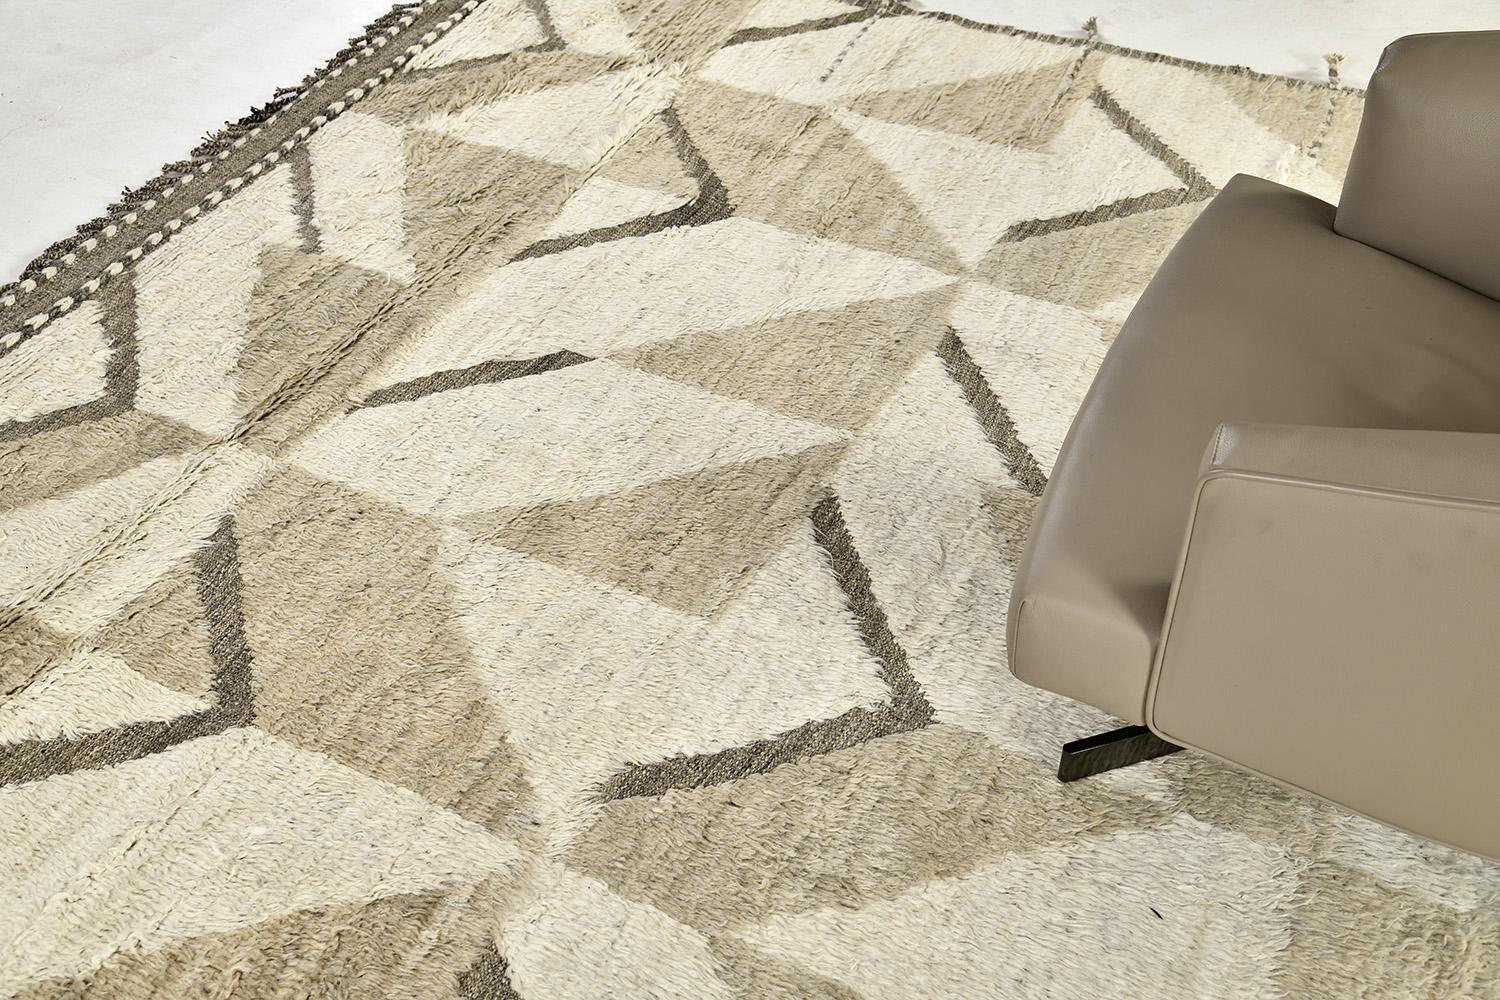 Handwoven of wool, Calcere uses geometric repeating patterns across the border. Sand, taupe and the perfect shade of ivory make up a short shag surface with a natural earth toned flat weave underlying the embossed detailing.


Rug number